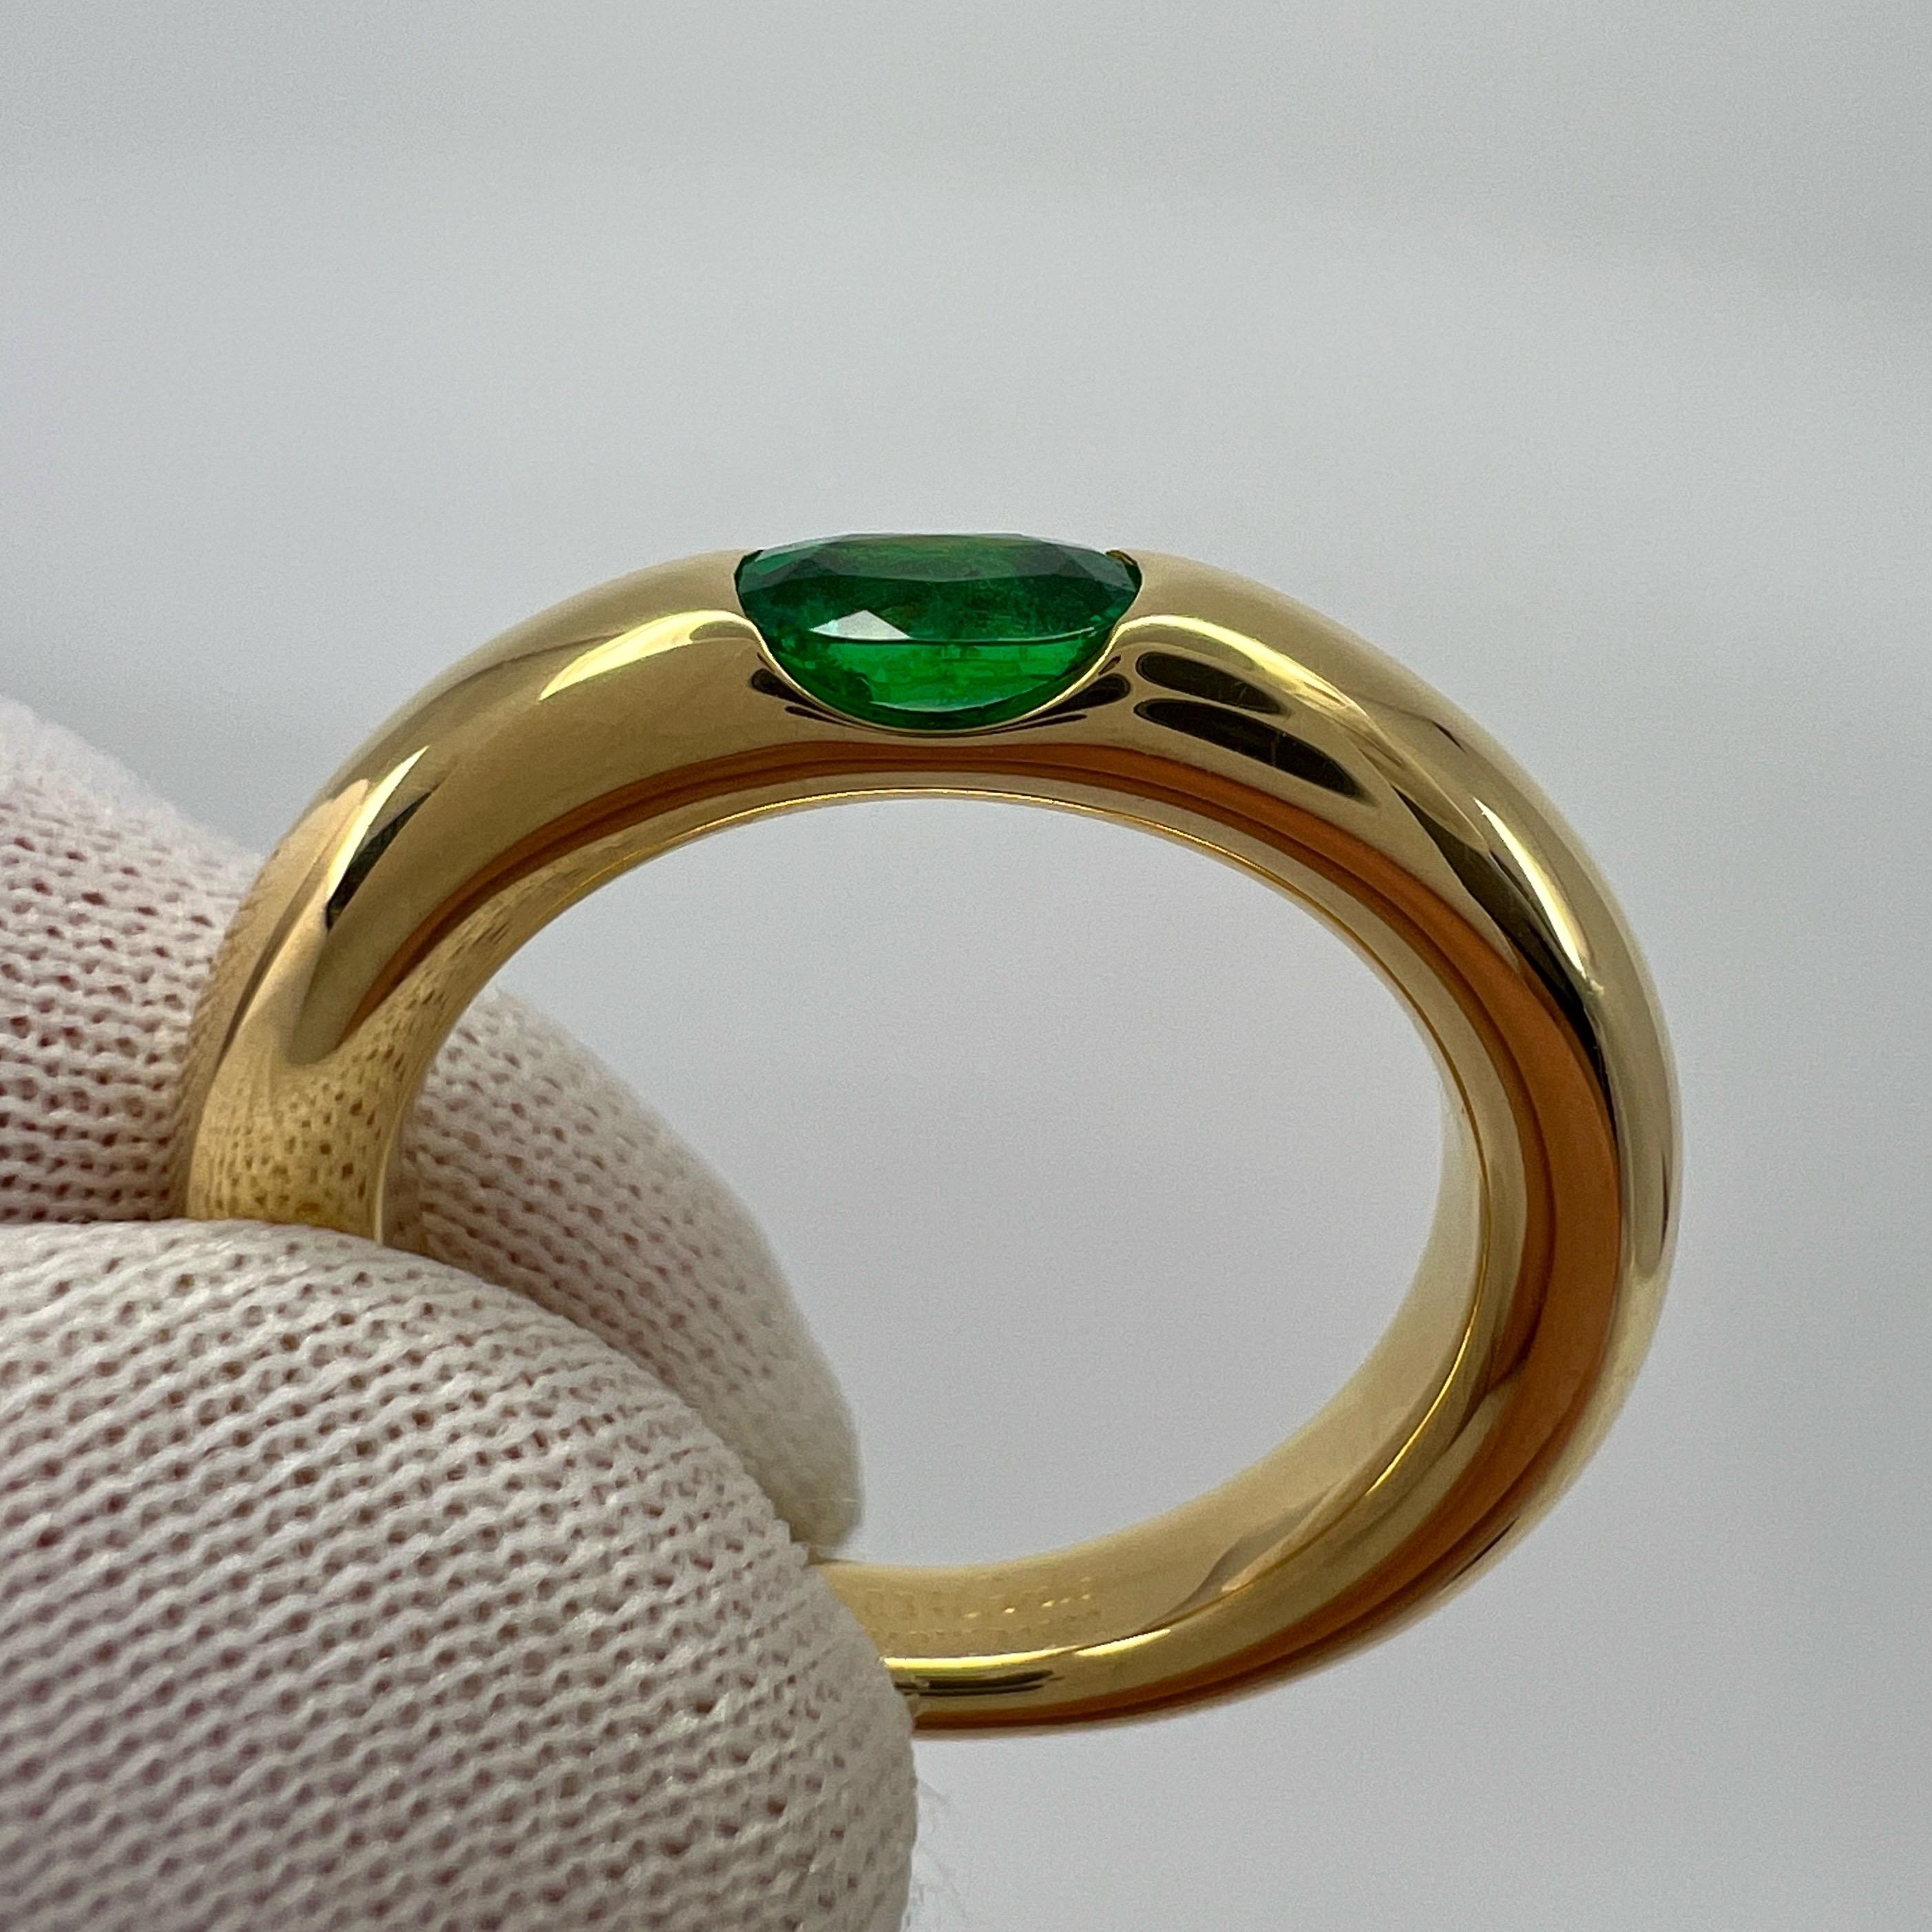 Vintage Cartier Emerald Vivid Green Ellipse 18k Yellow Gold Solitaire Ring 51  1